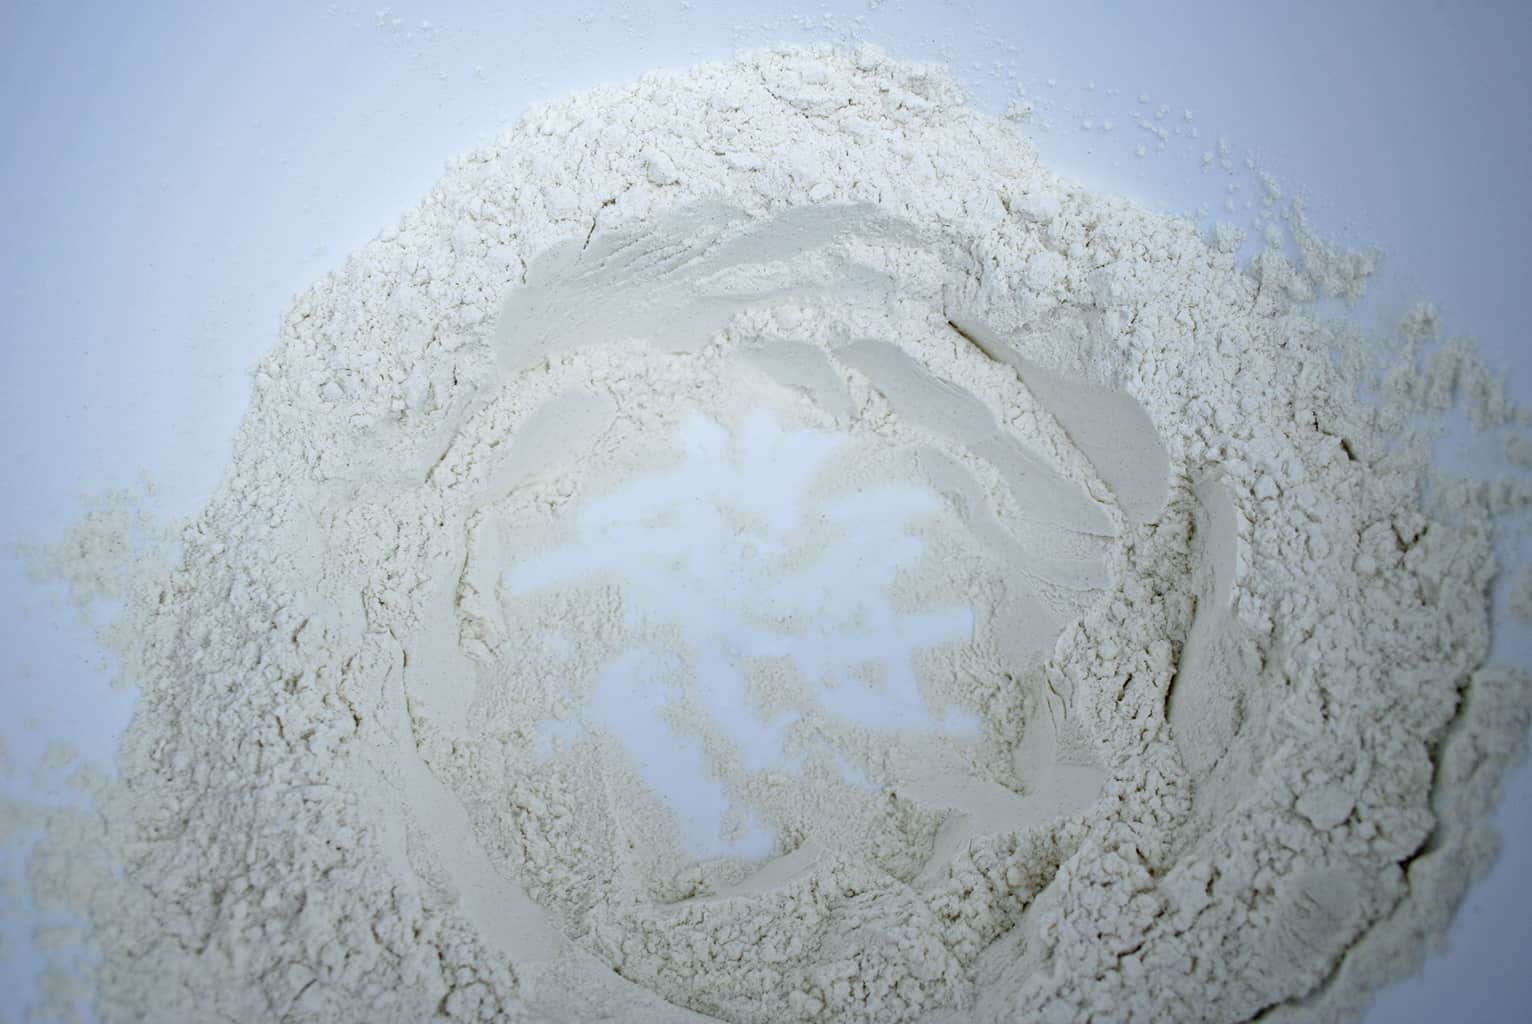 make a well in the flour